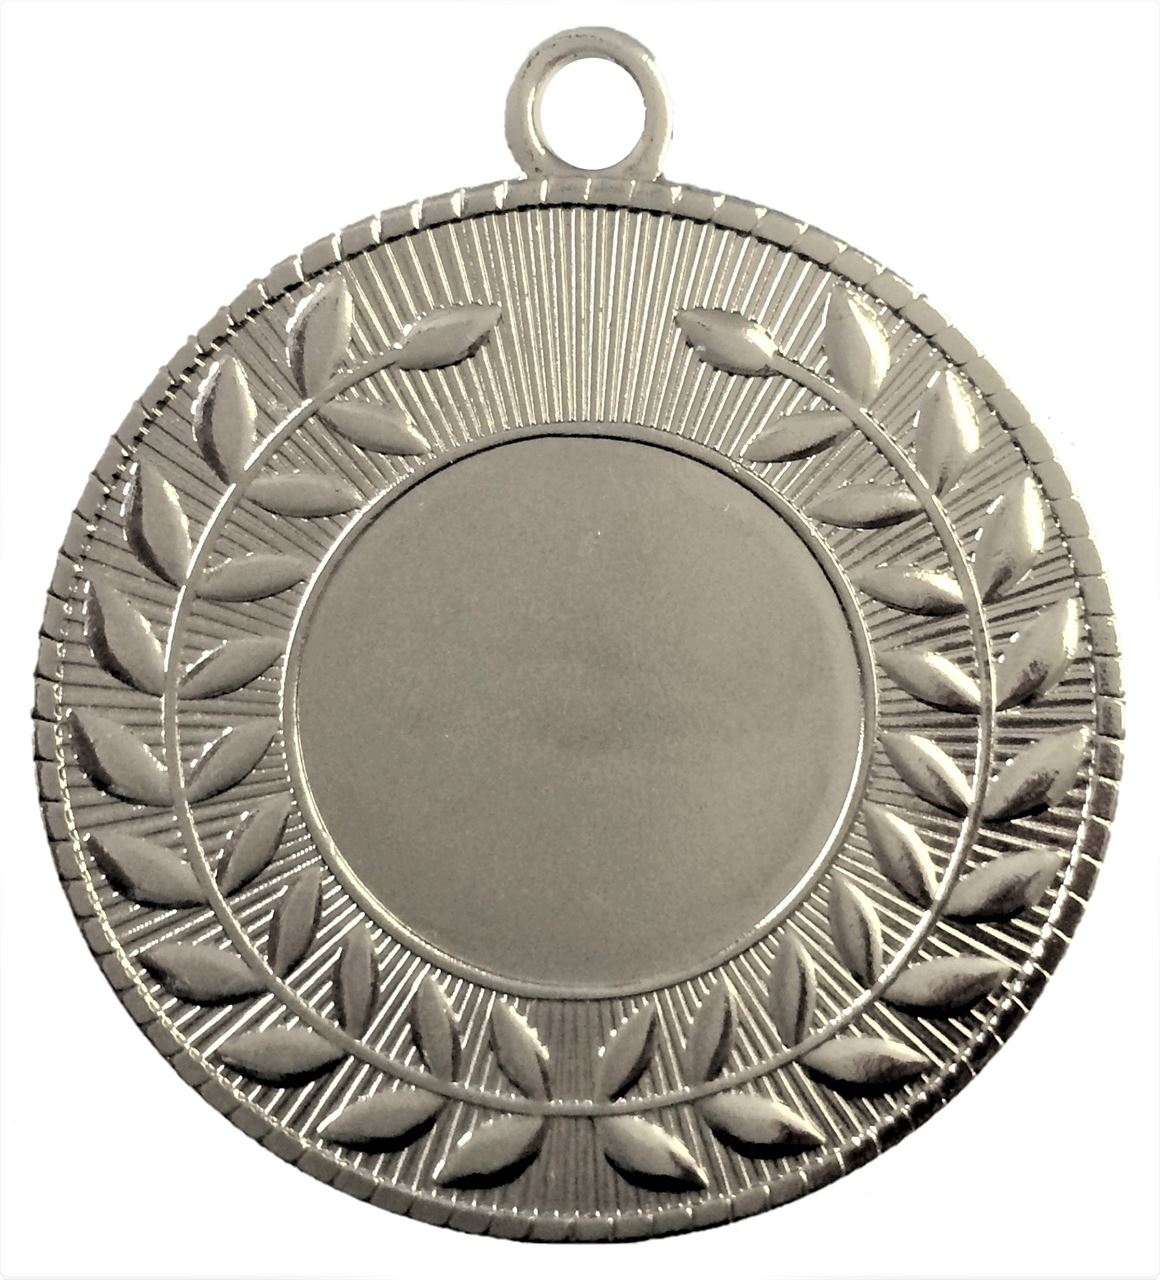 Silver Economy Dawning Medal (50mm) - 7008S